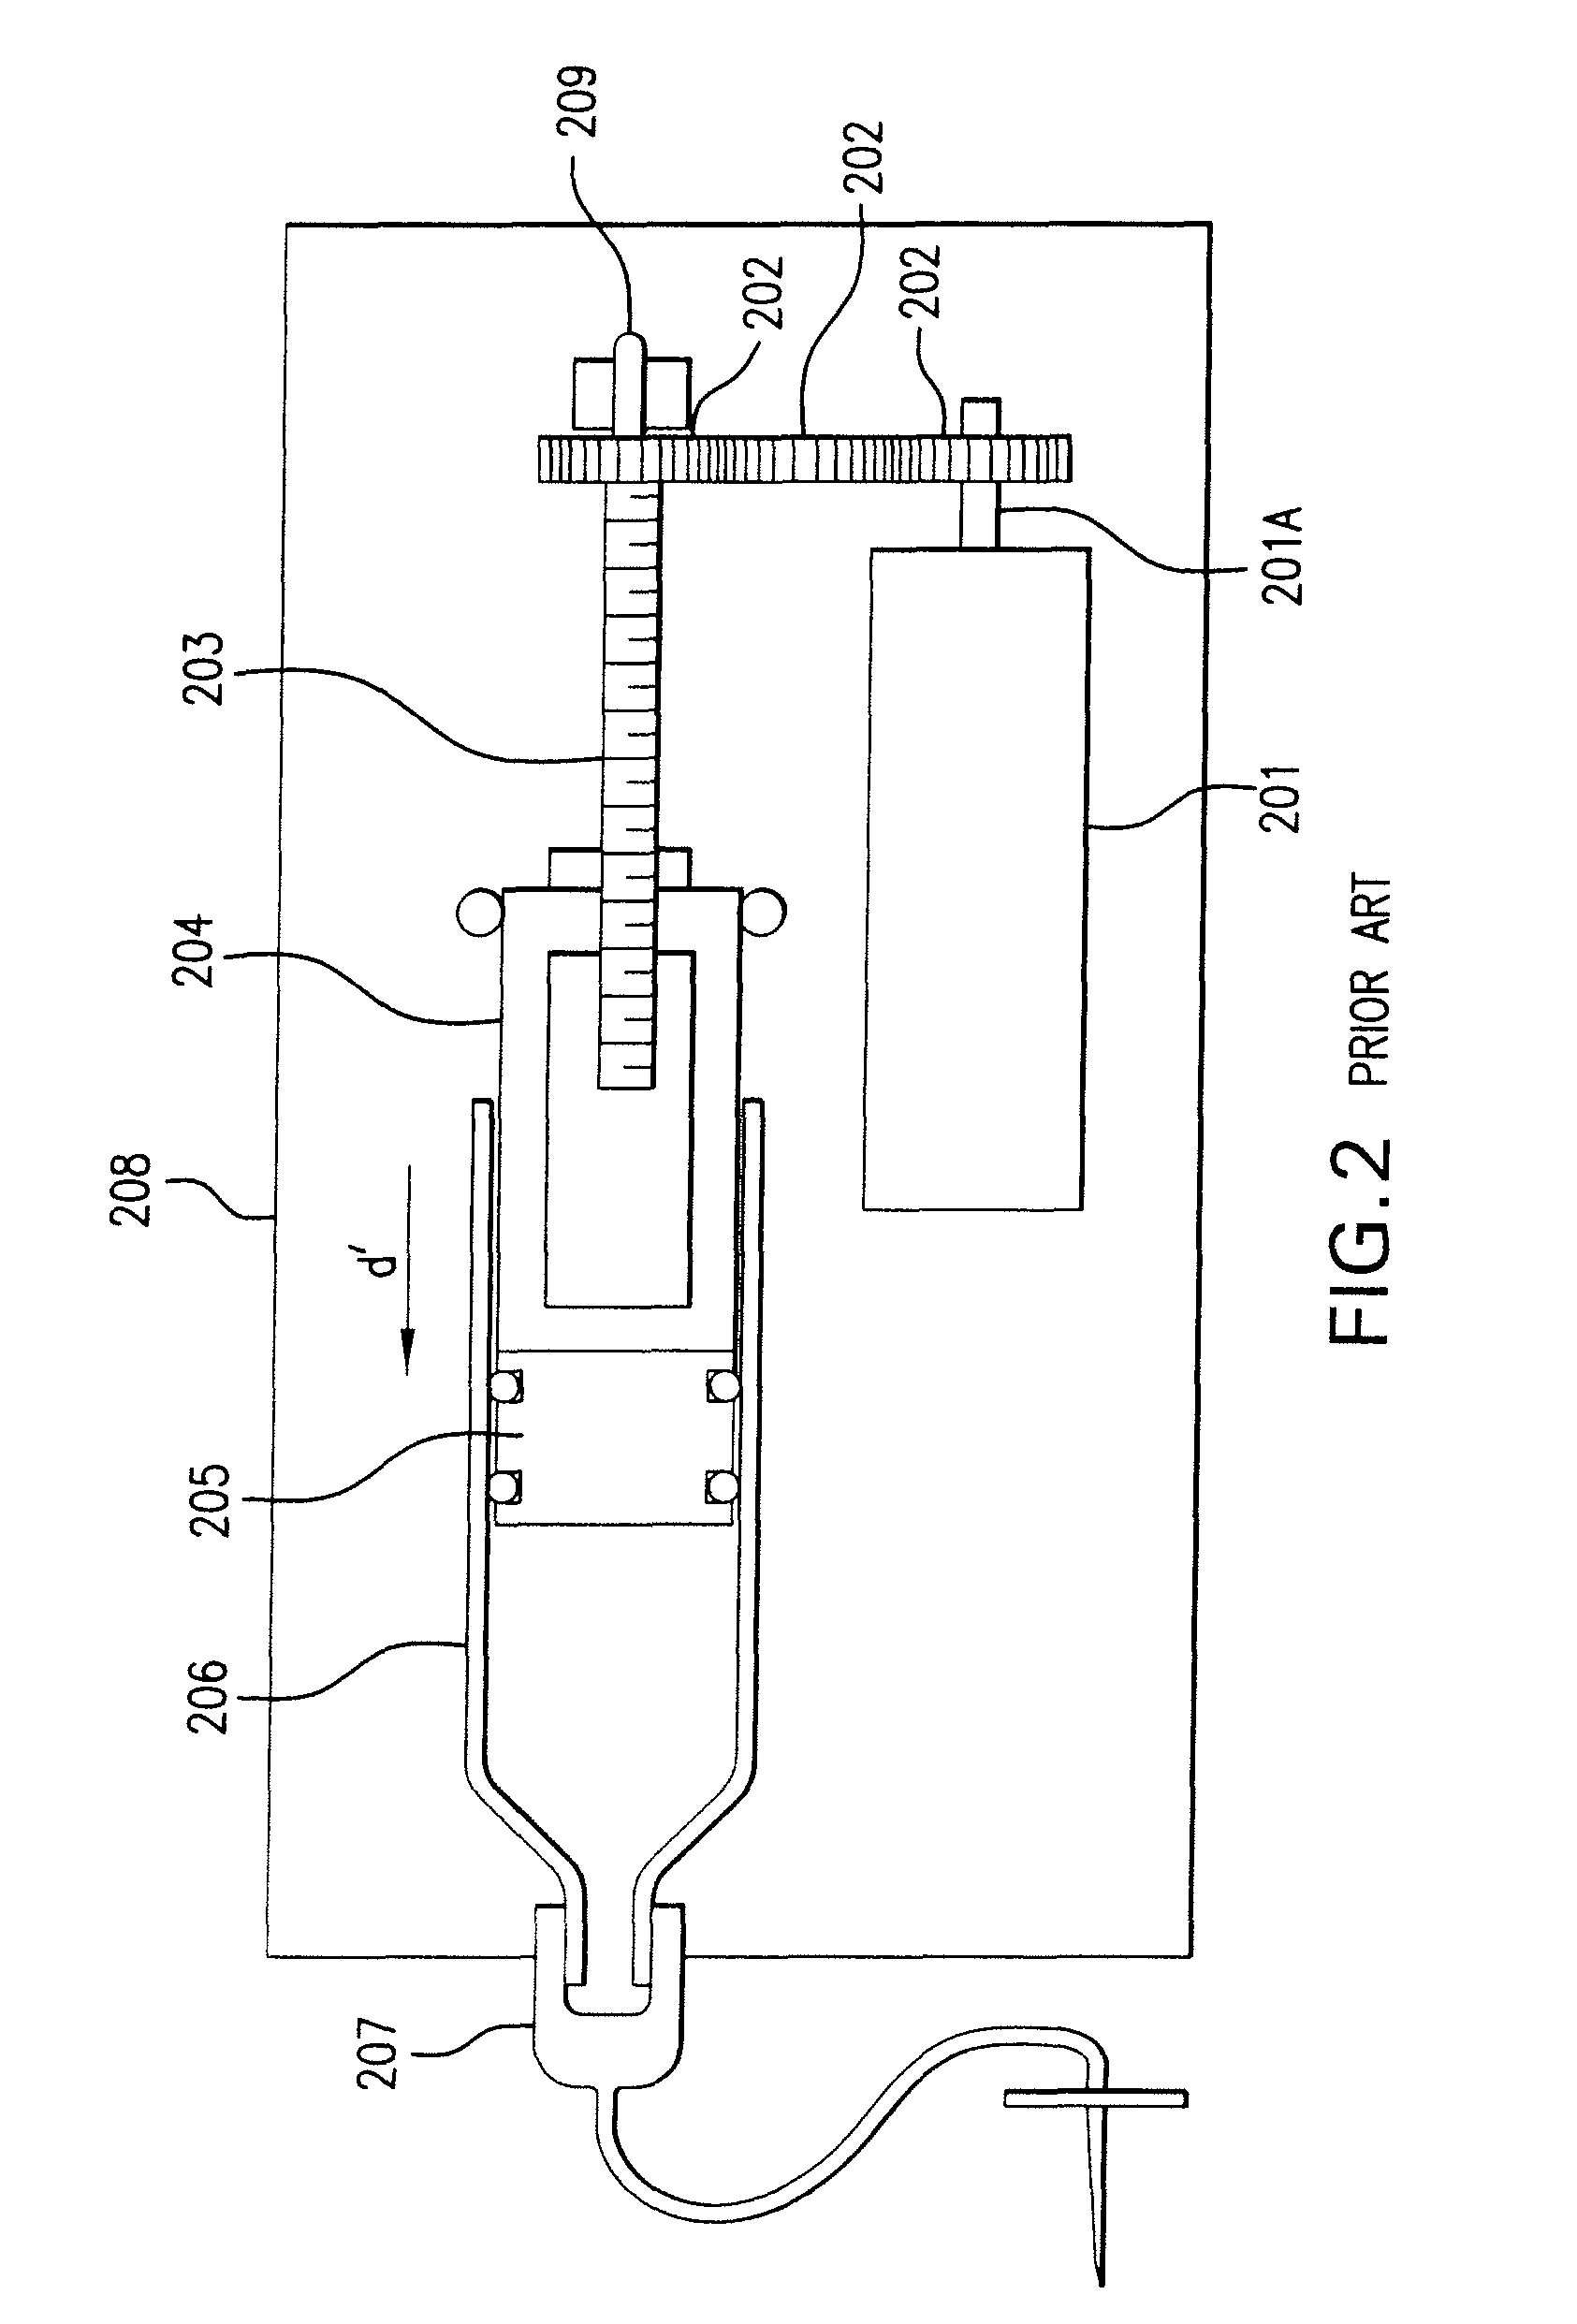 Method and apparatus for detecting occlusions in an ambulatory infusion pump